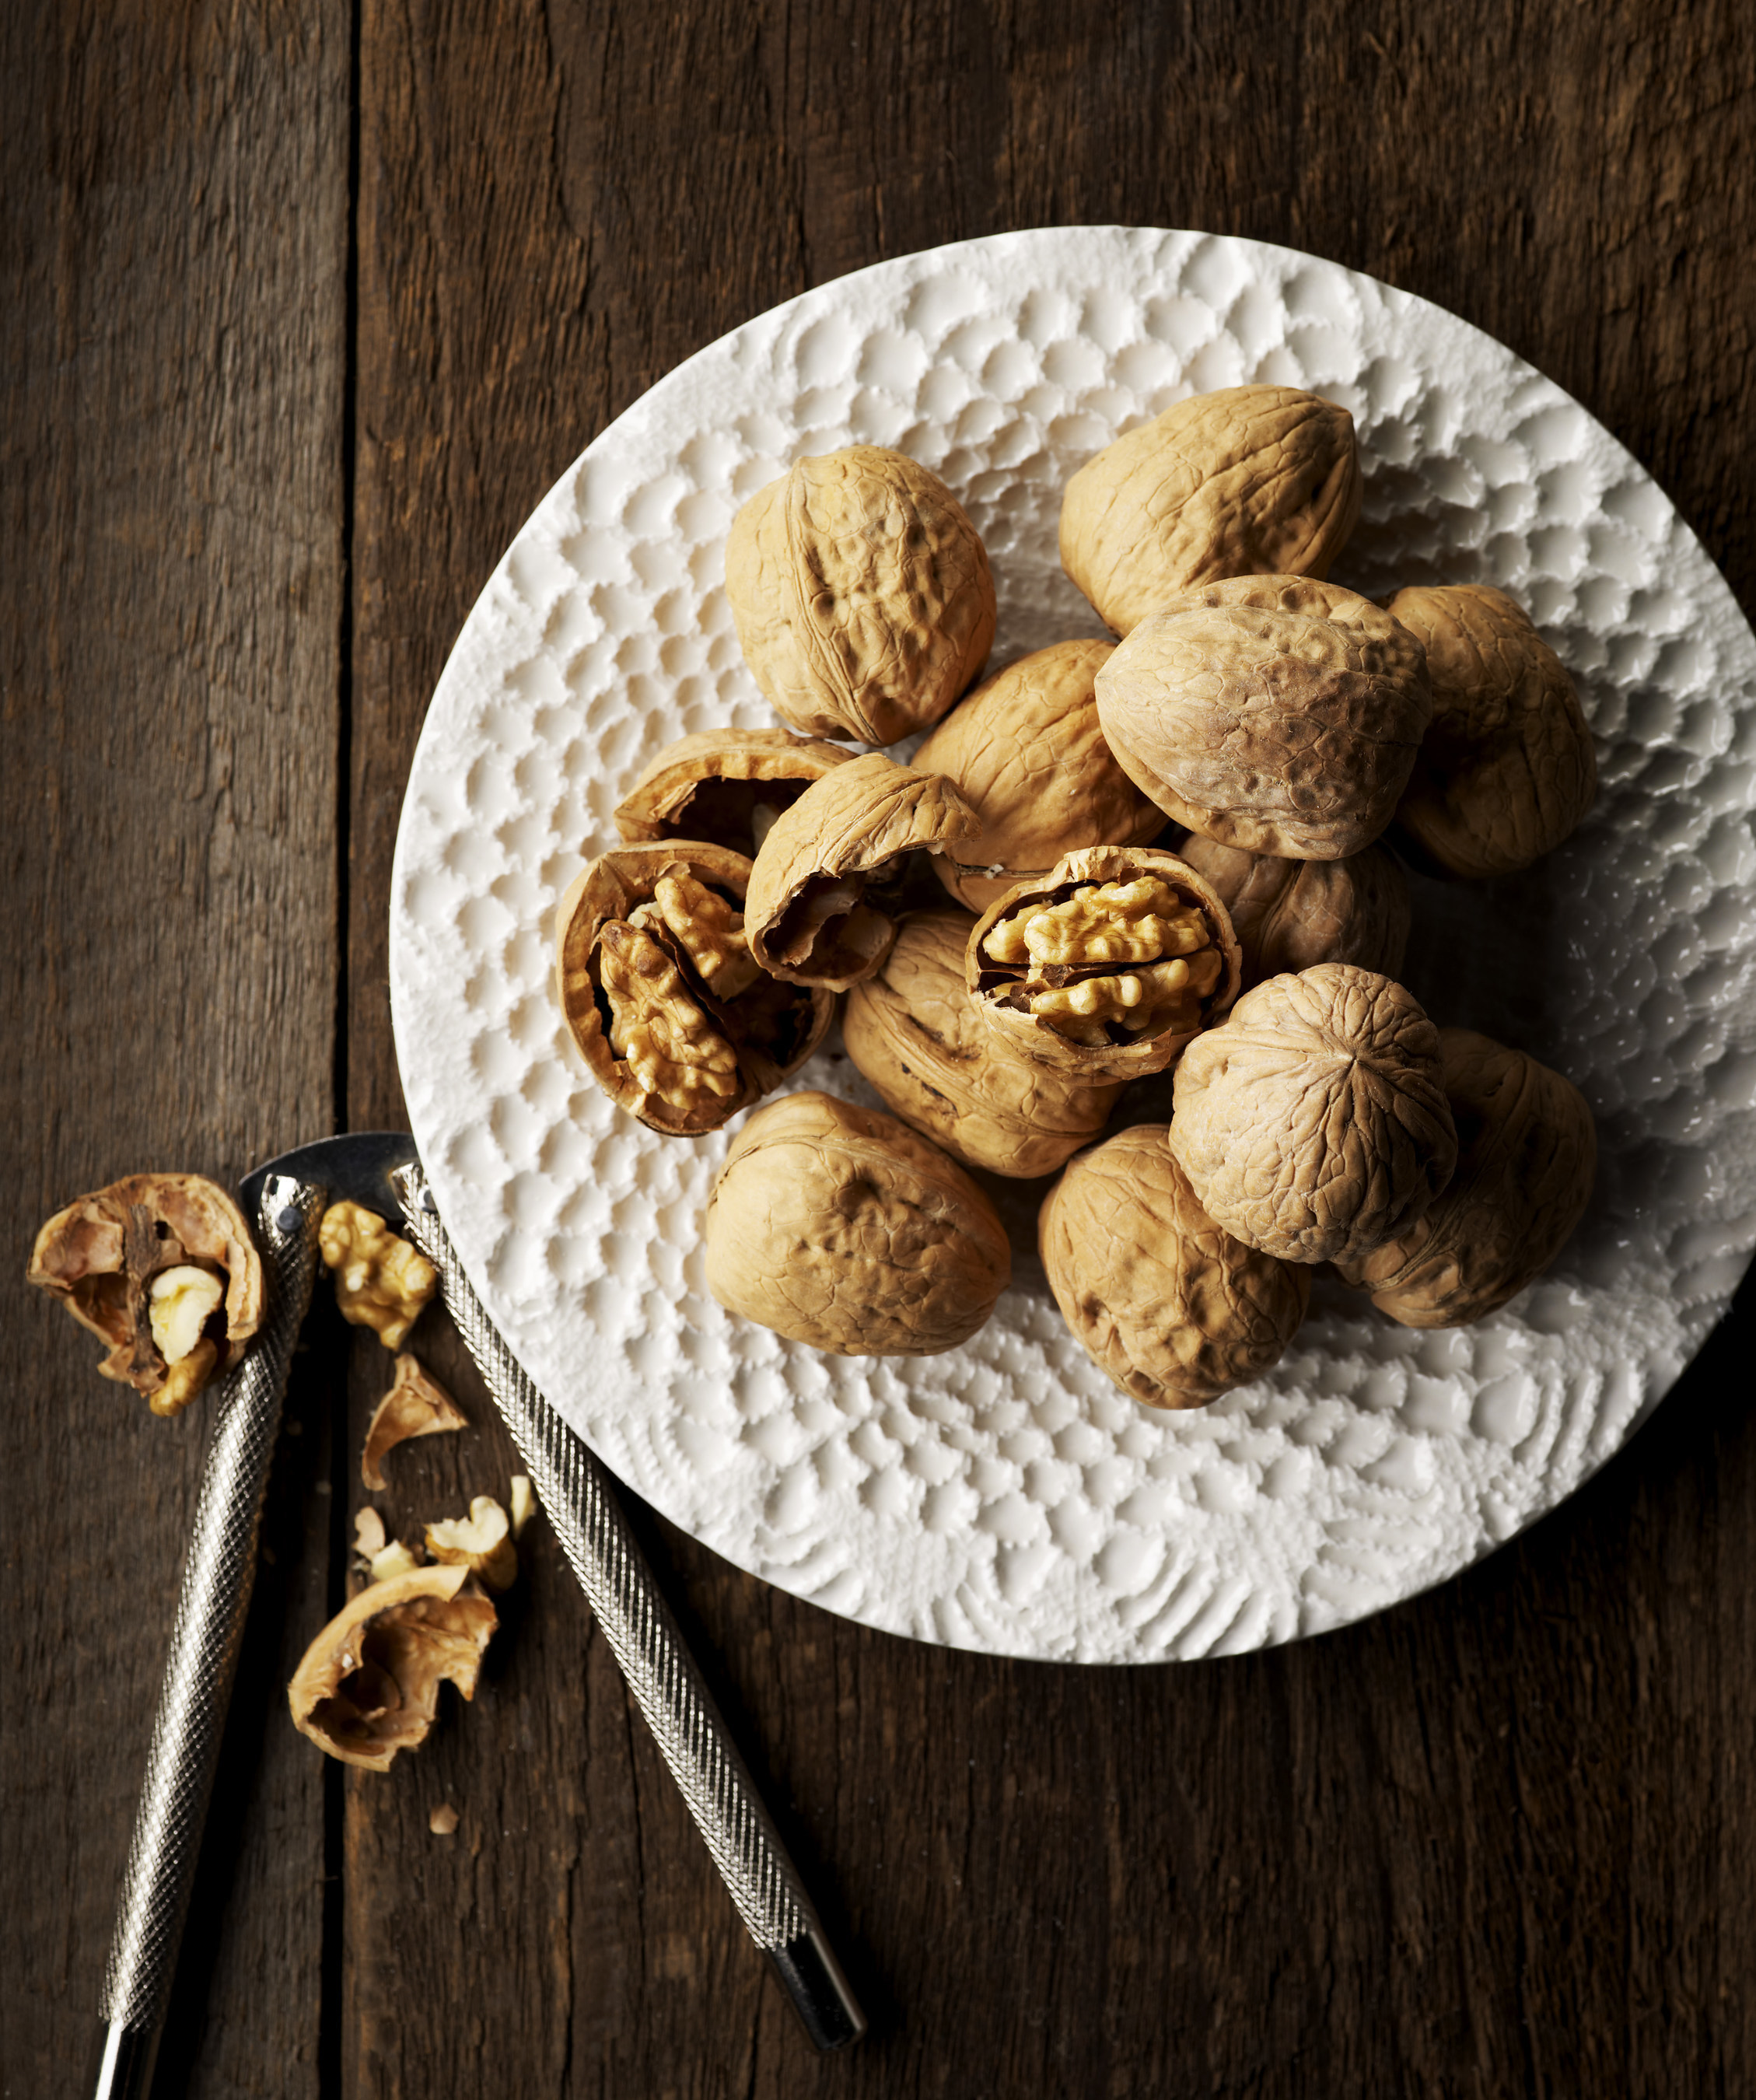 New Findings Support the Benefits of Eating Walnuts on Overall Health